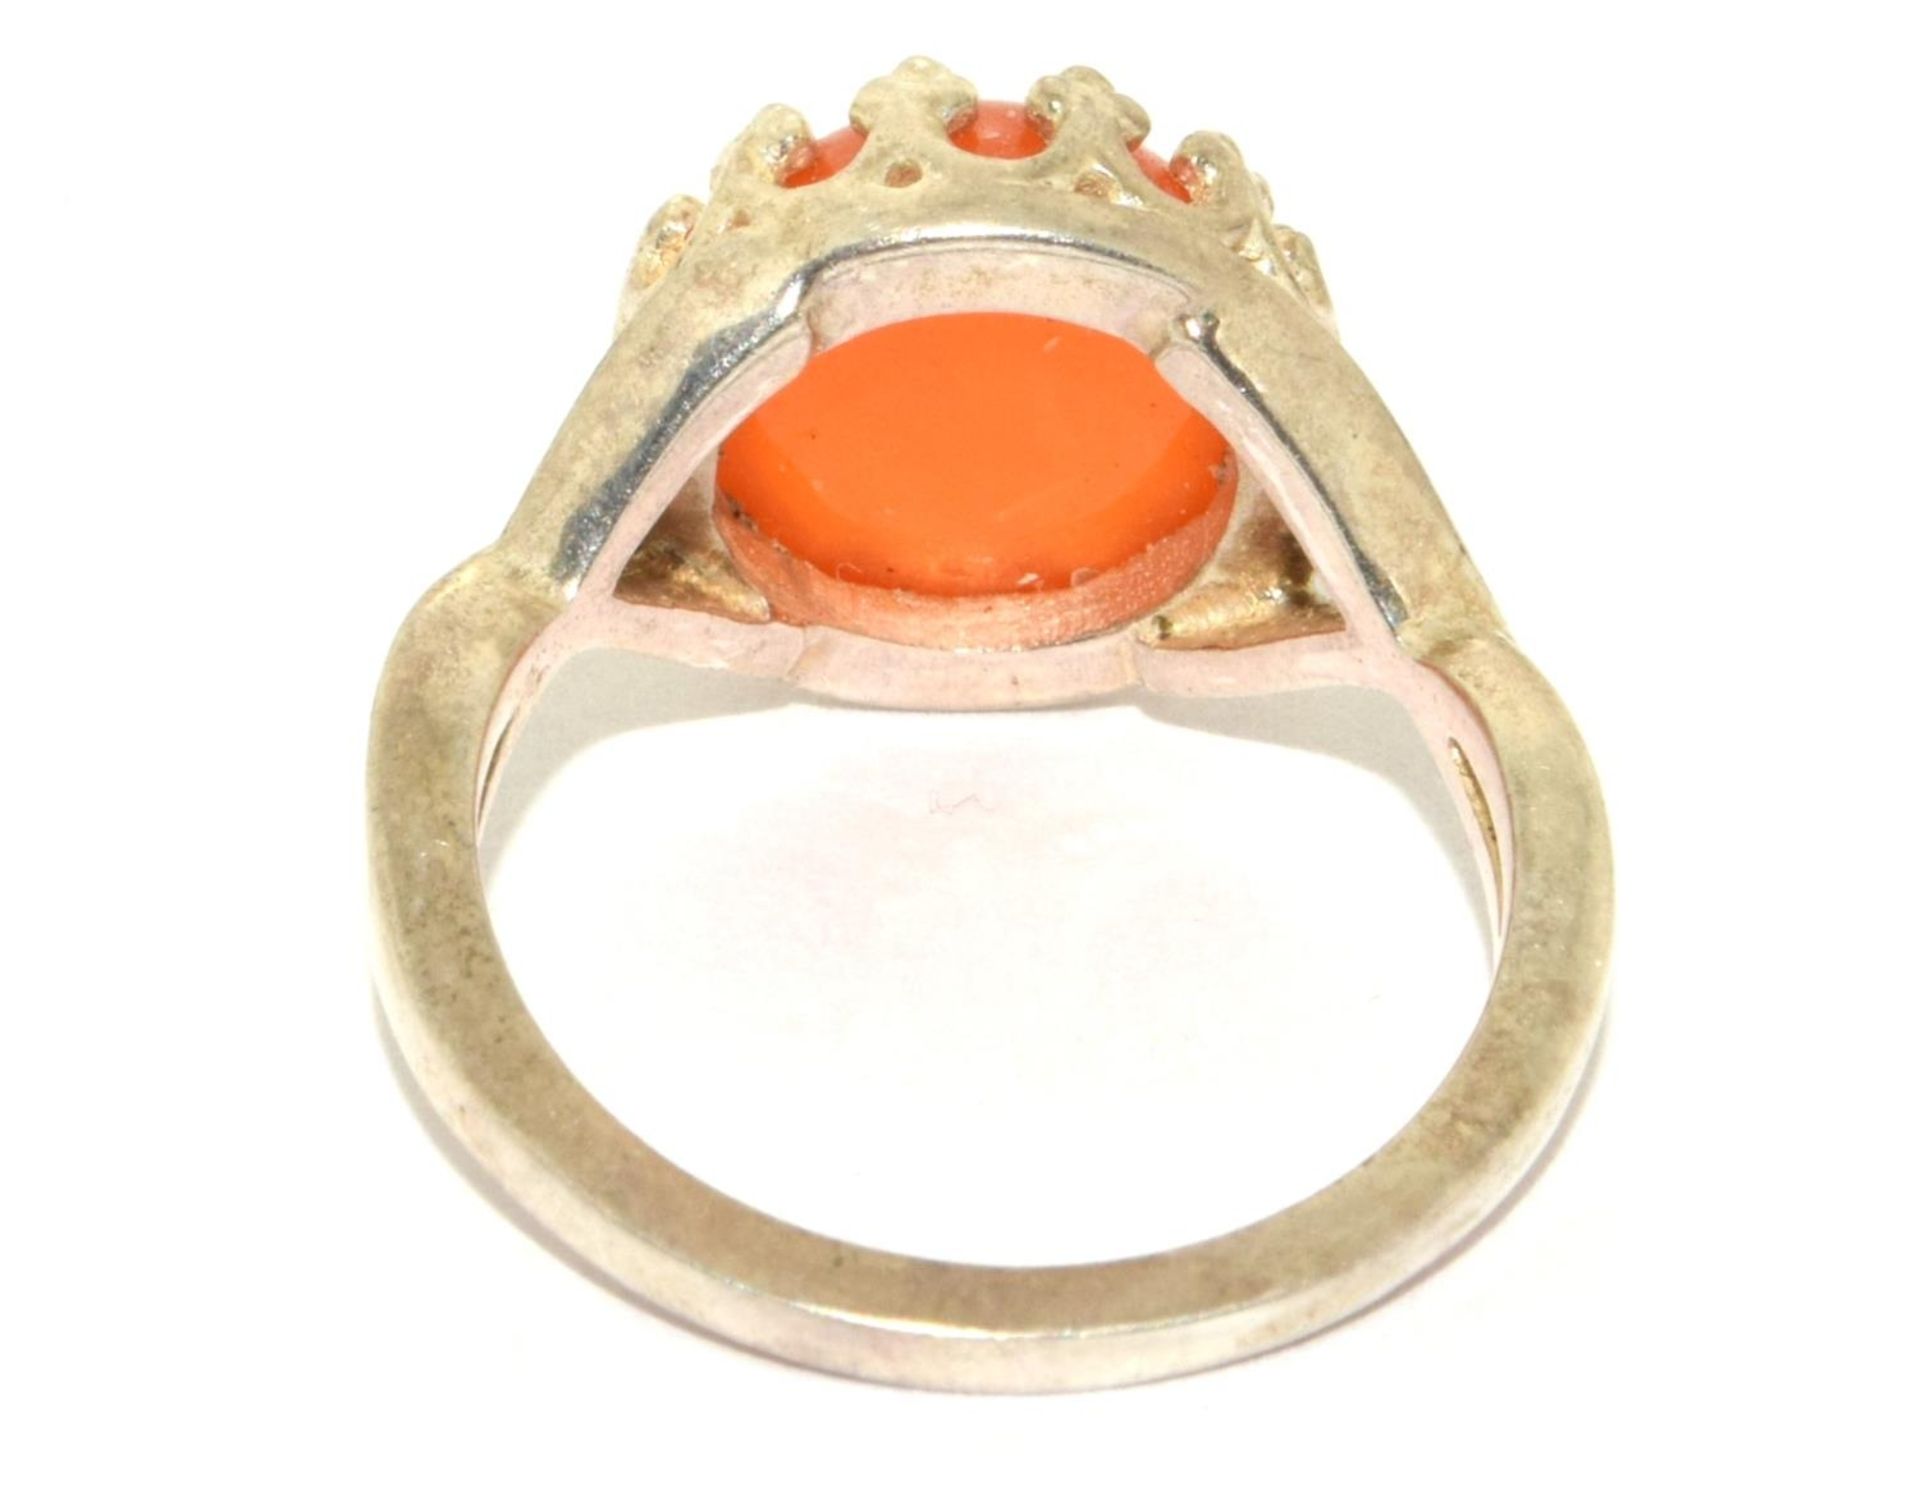 A 925 silver and Carnelian ring Size N 1/2. - Image 3 of 3